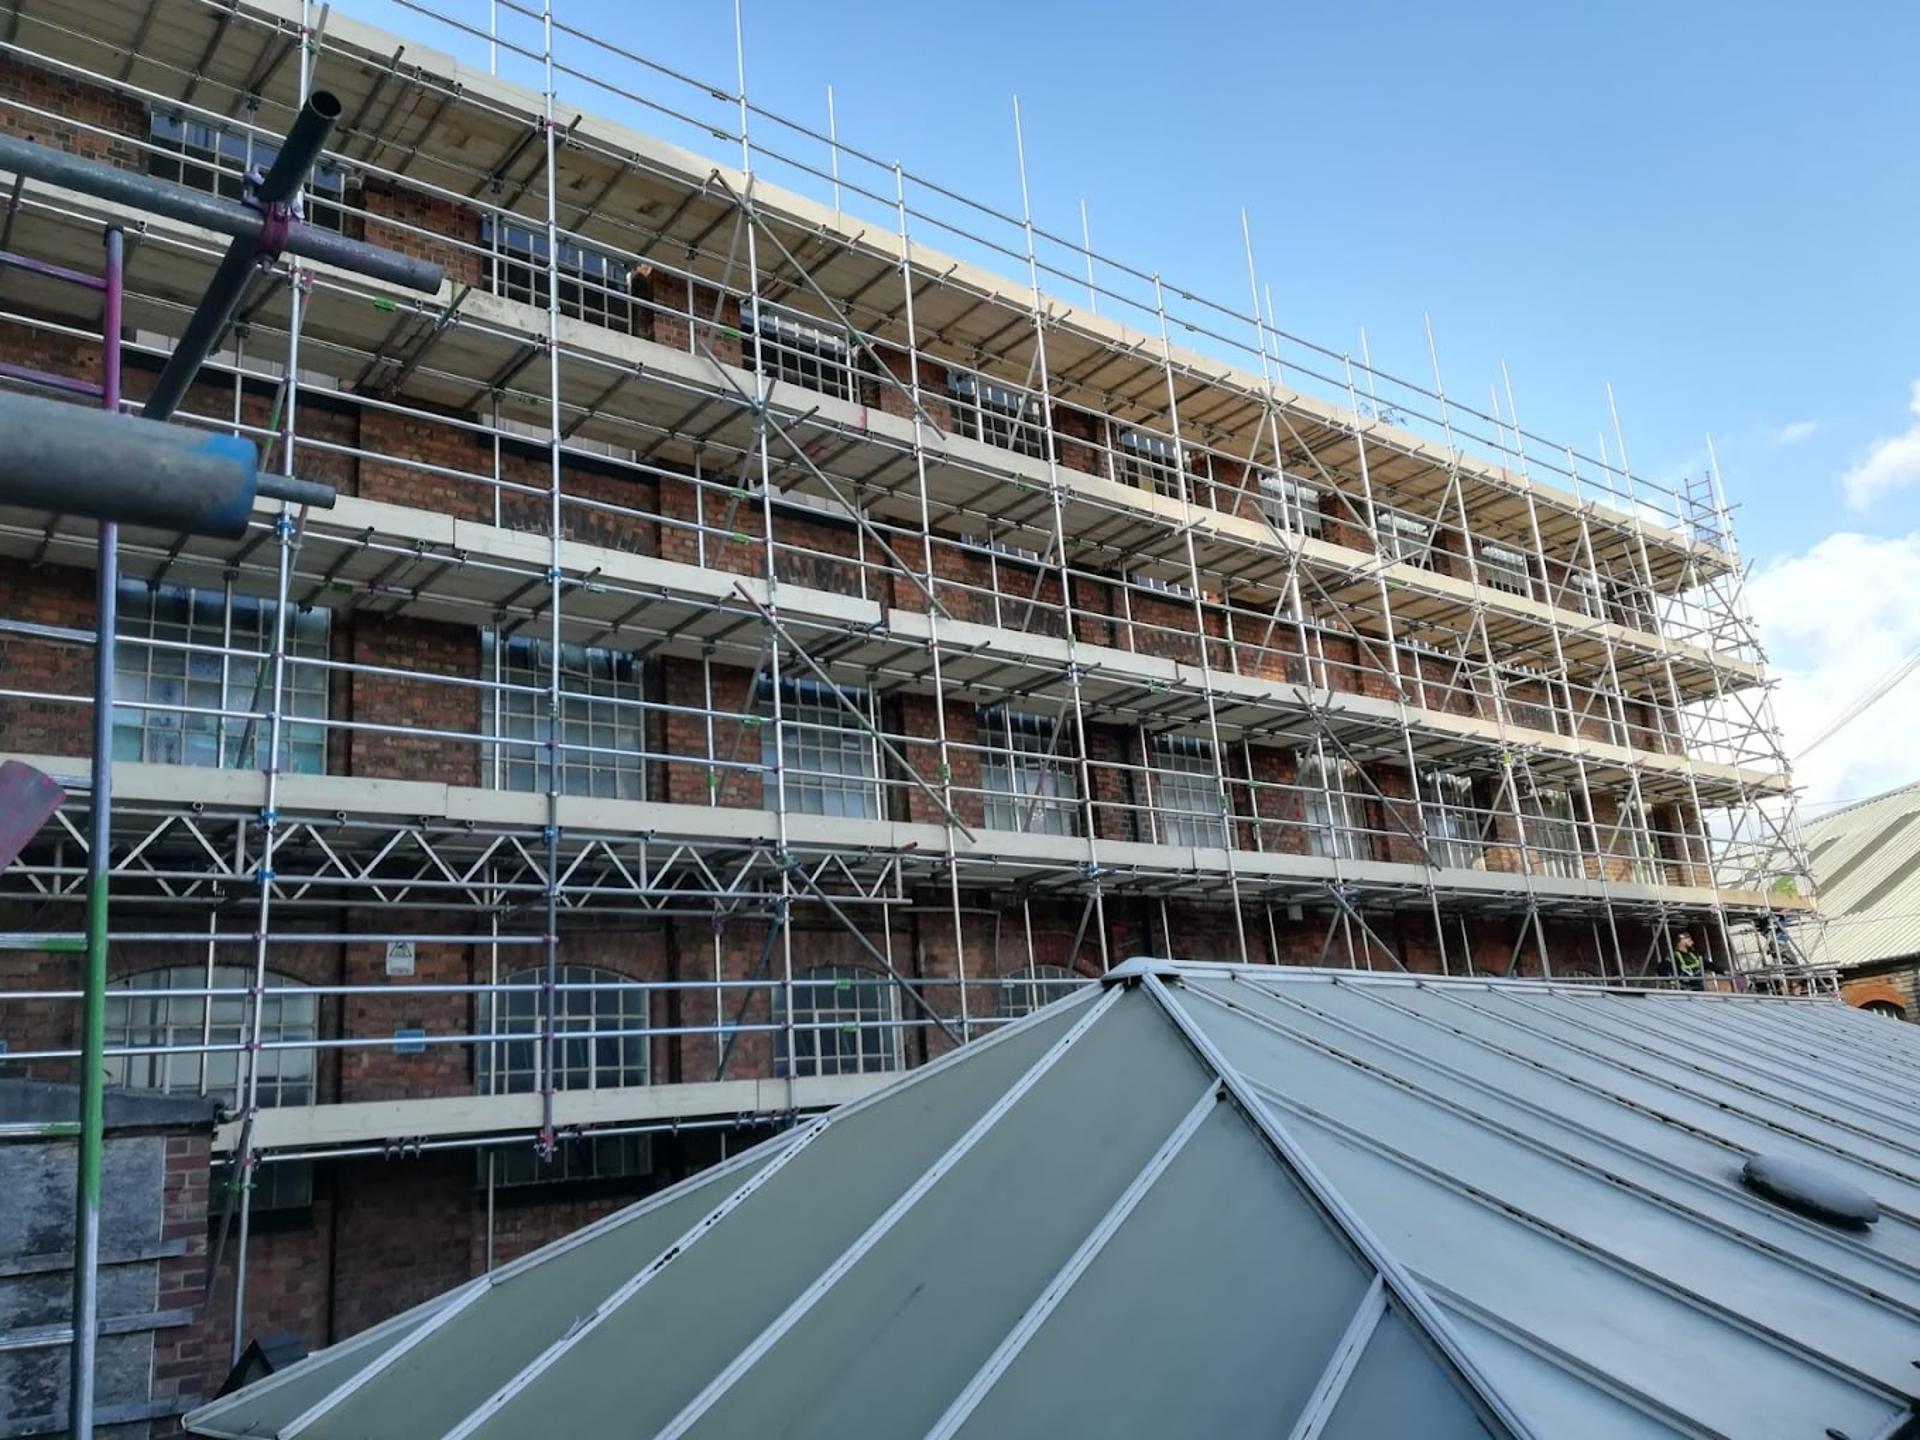 Assets to be sold following scaffolding firm’s collapse